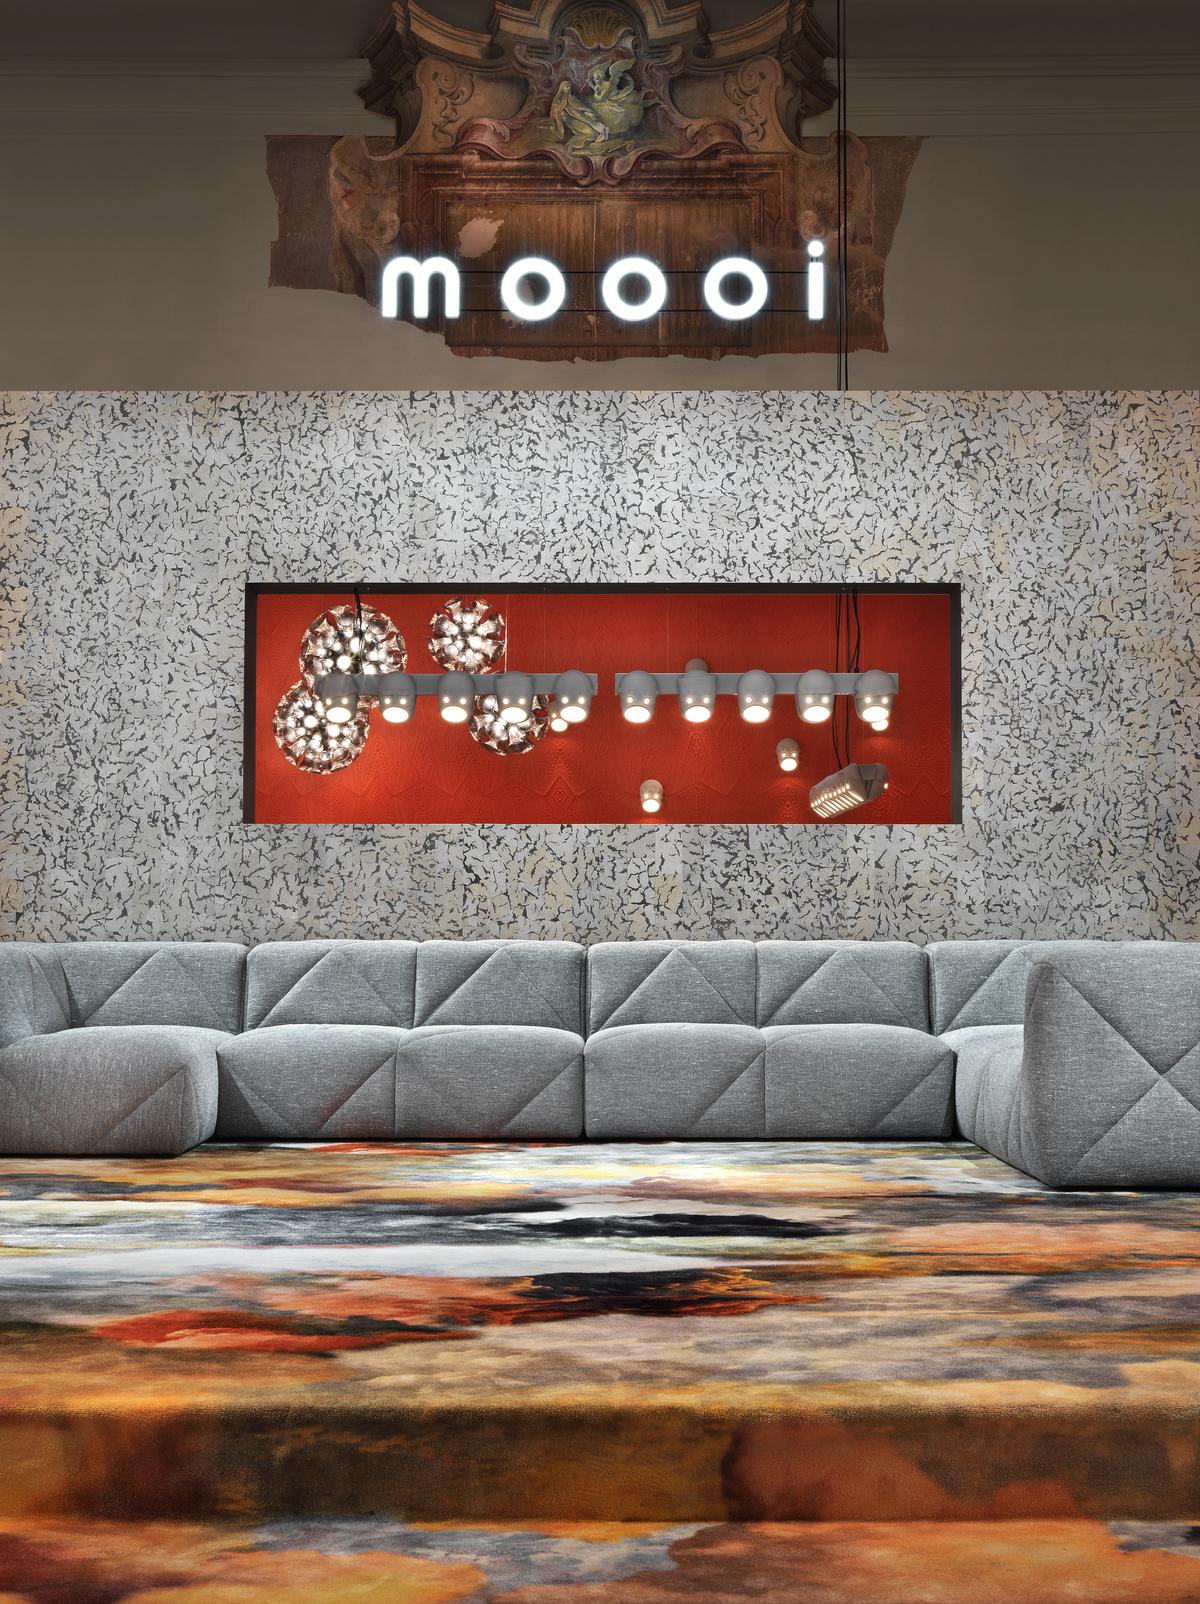 Moooi BFF Left Arm Chaise Longue Sofa in Justo, Bazalt Upholstery In New Condition For Sale In Brooklyn, NY